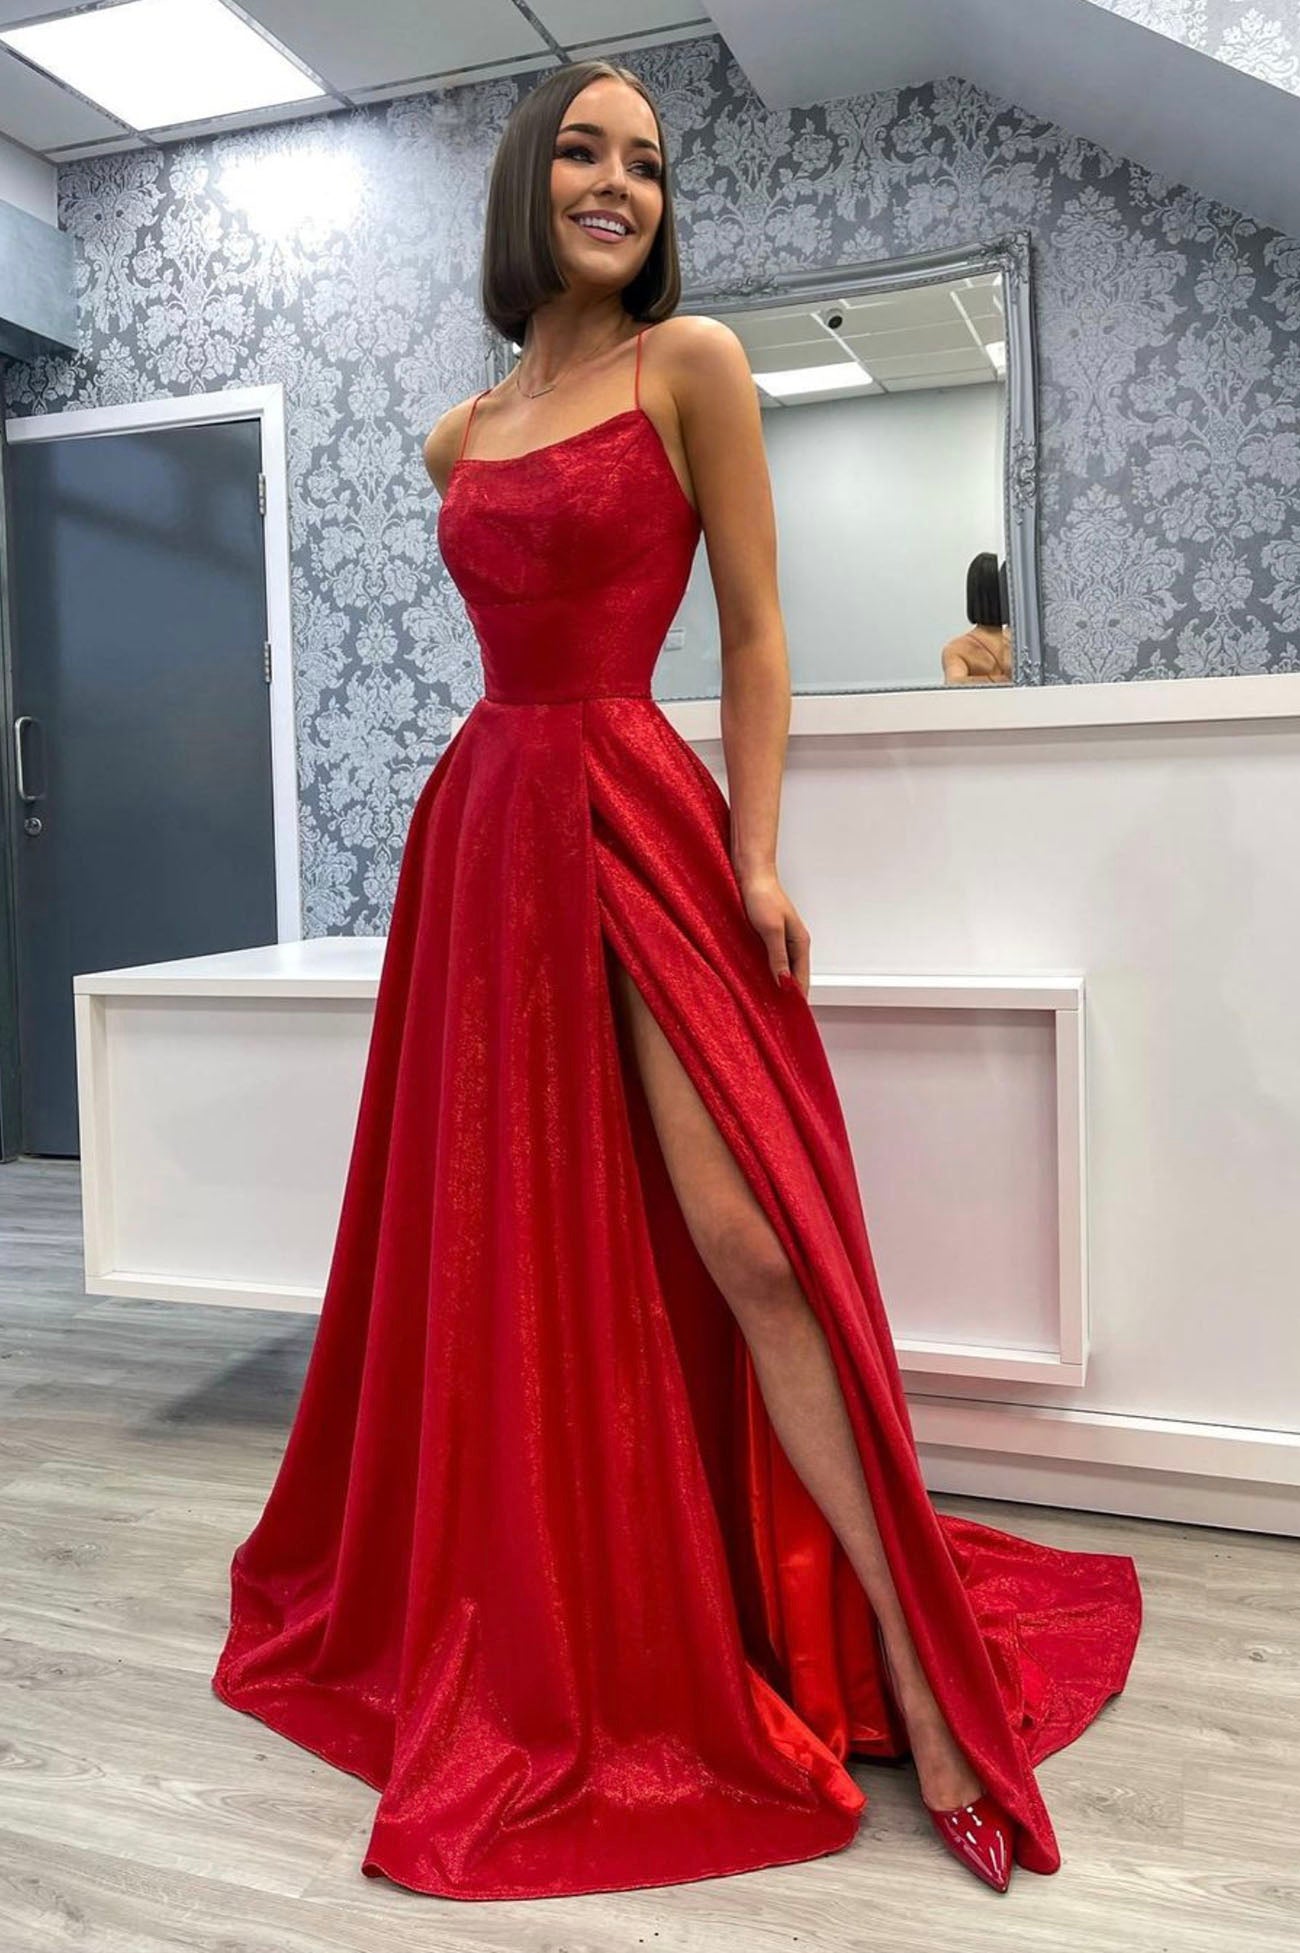 Red Satin Long Prom Dress, A-Line Backless Evening Party Dress